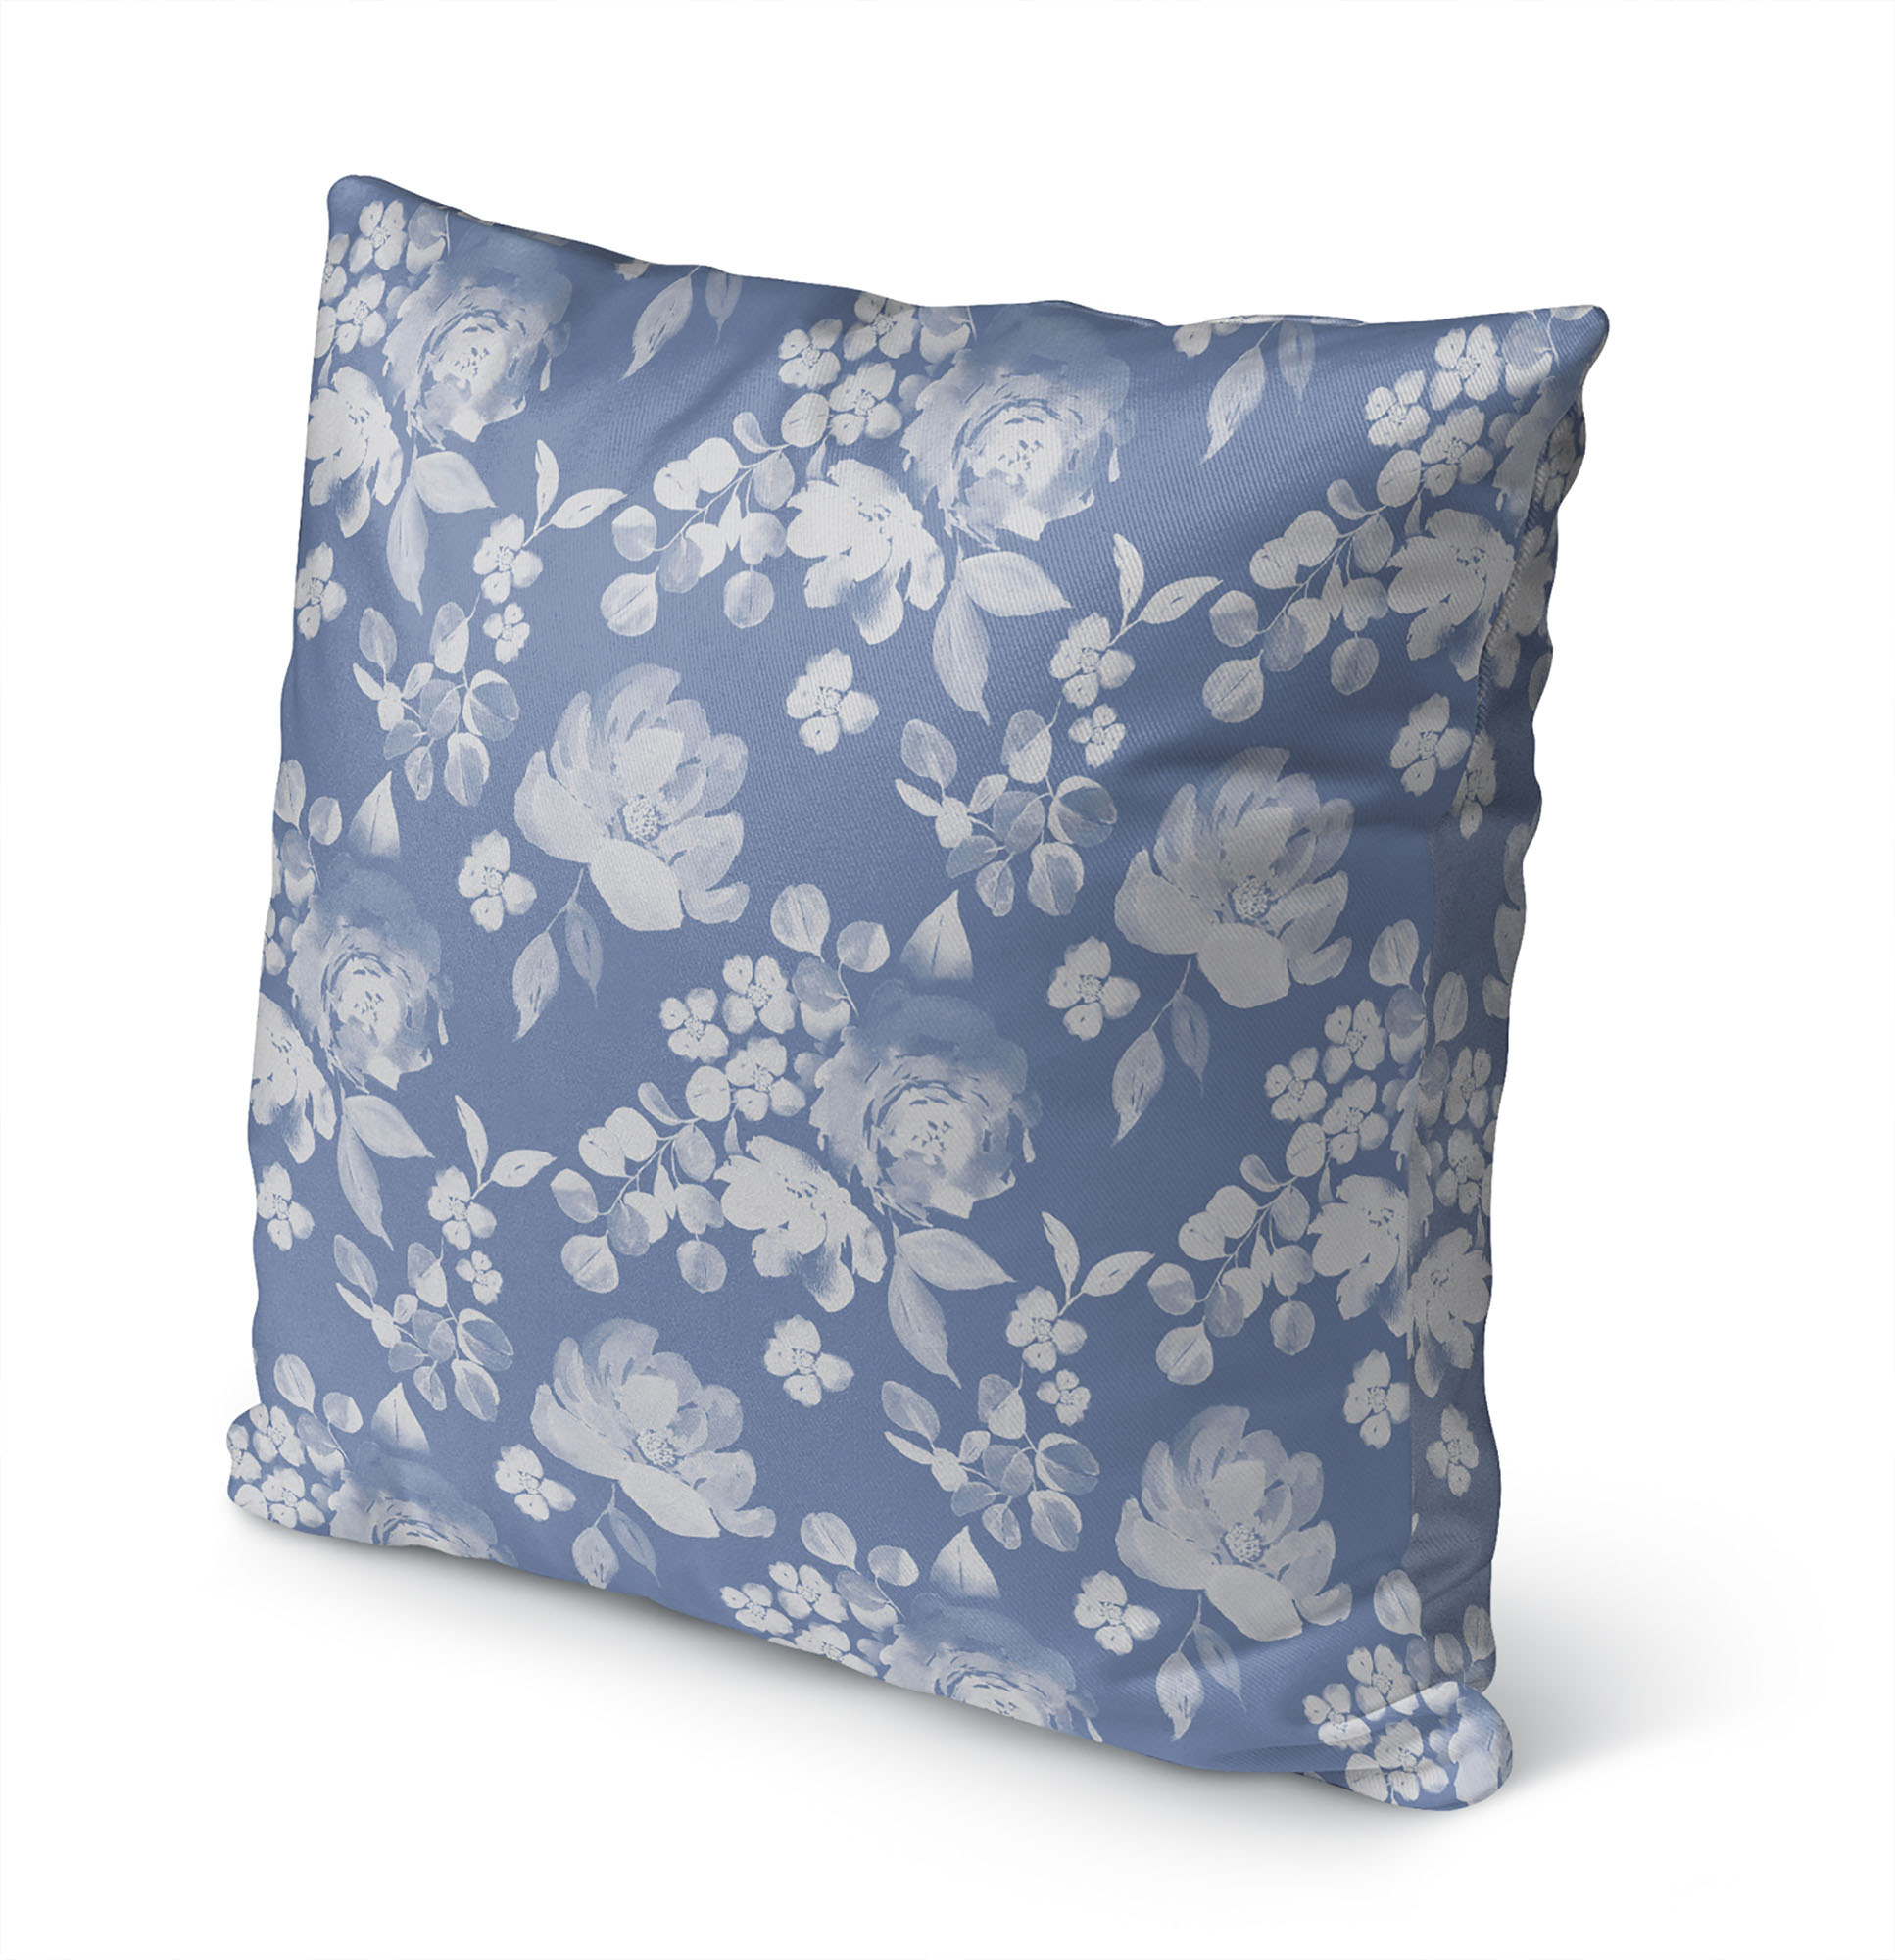 Cottage Blue Outdoor Pillow by Kavka Designs - image 3 of 5